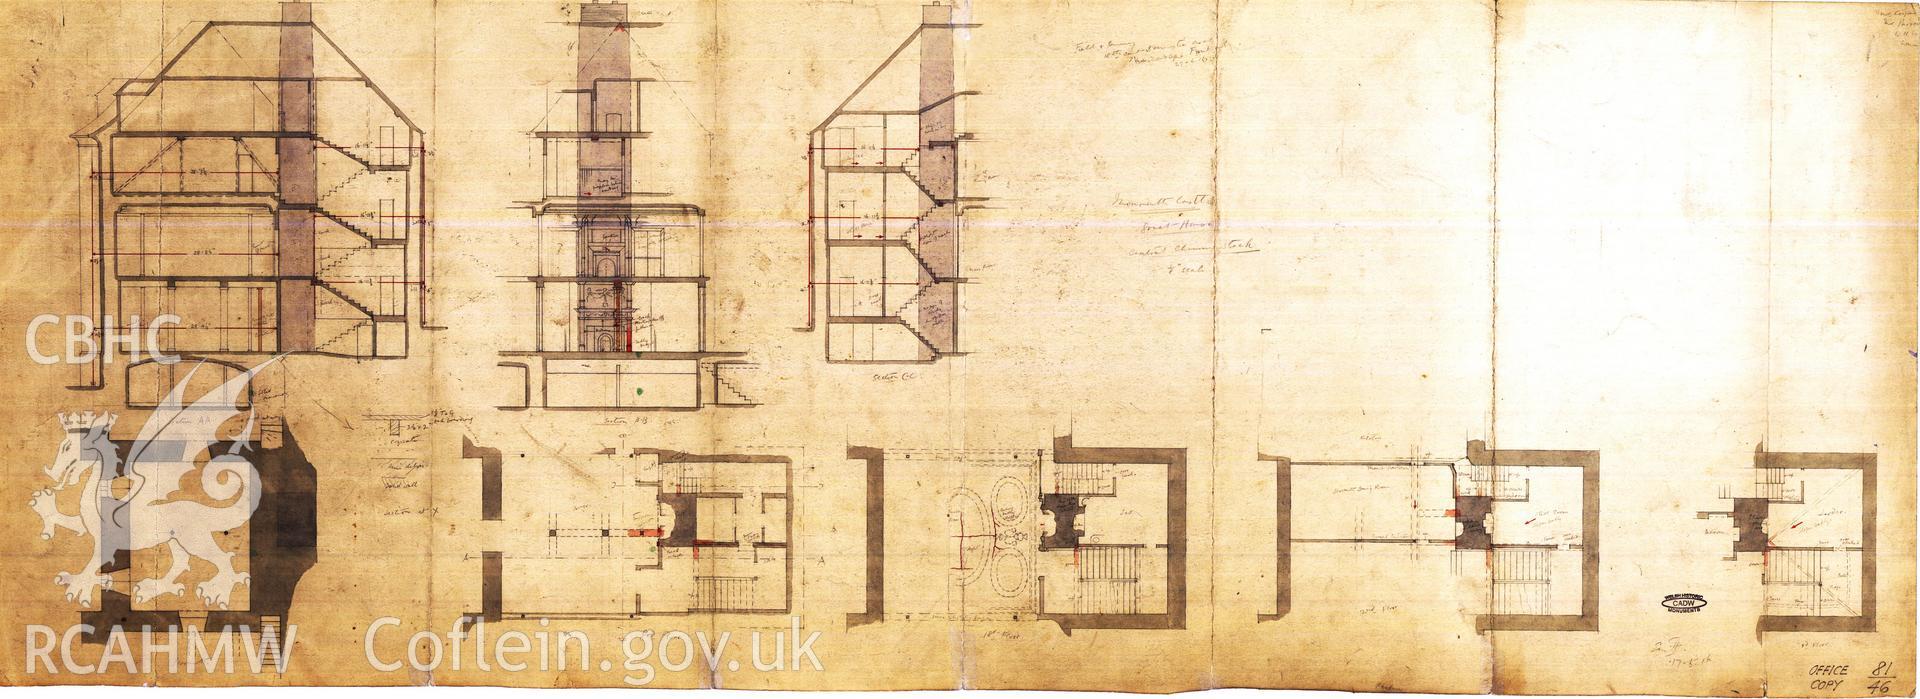 Cadw guardianship monument drawing of Monmouth Castle House. Chimney Sections. Cadw Ref. No:81/46. Scale 1:96.